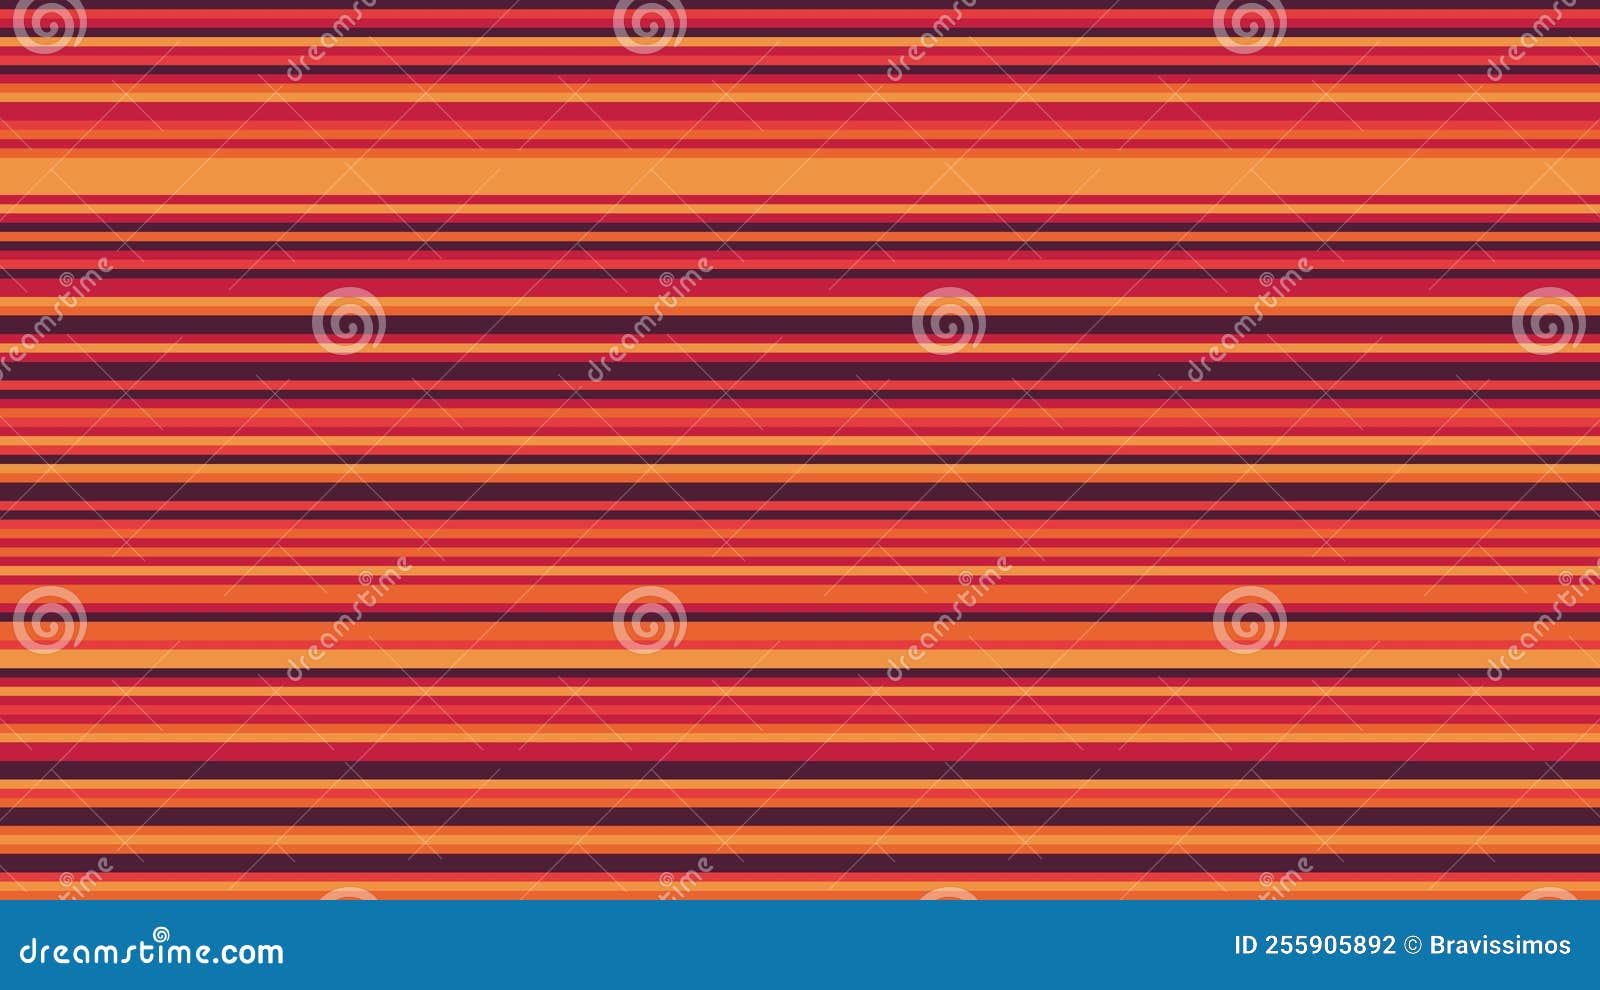 Red Background Stripes Horizontal Line Vector. Line Vector Stock Vector ...